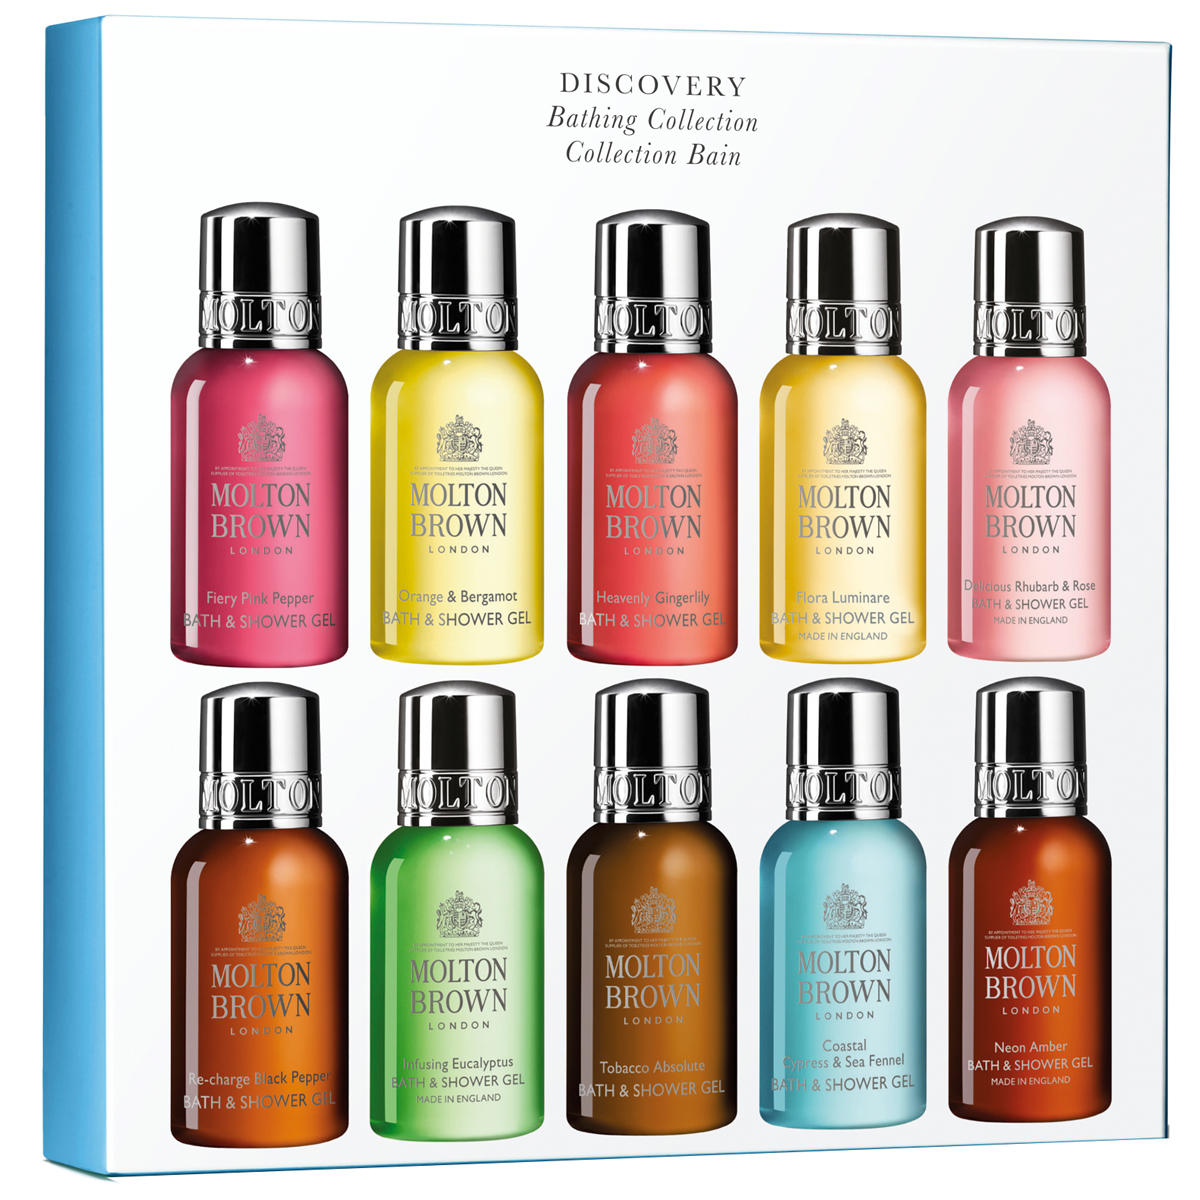 MOLTON BROWN DISCOVERY Bathing Collection  - 1